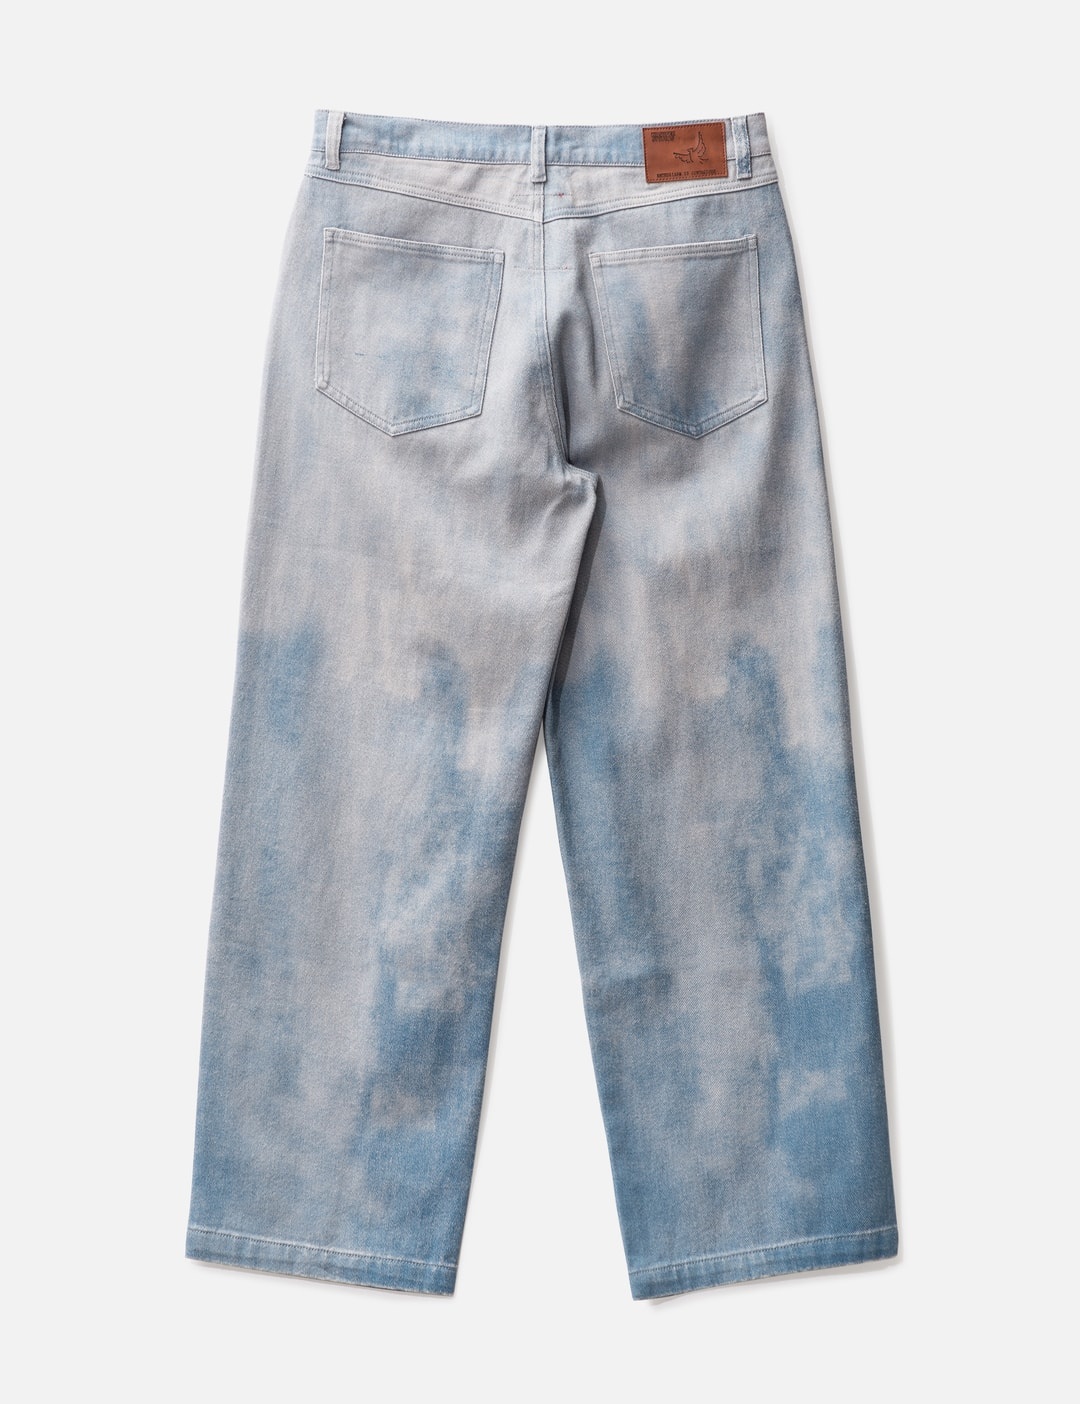 PERFORMERS DISTRESSED JEANS - 2